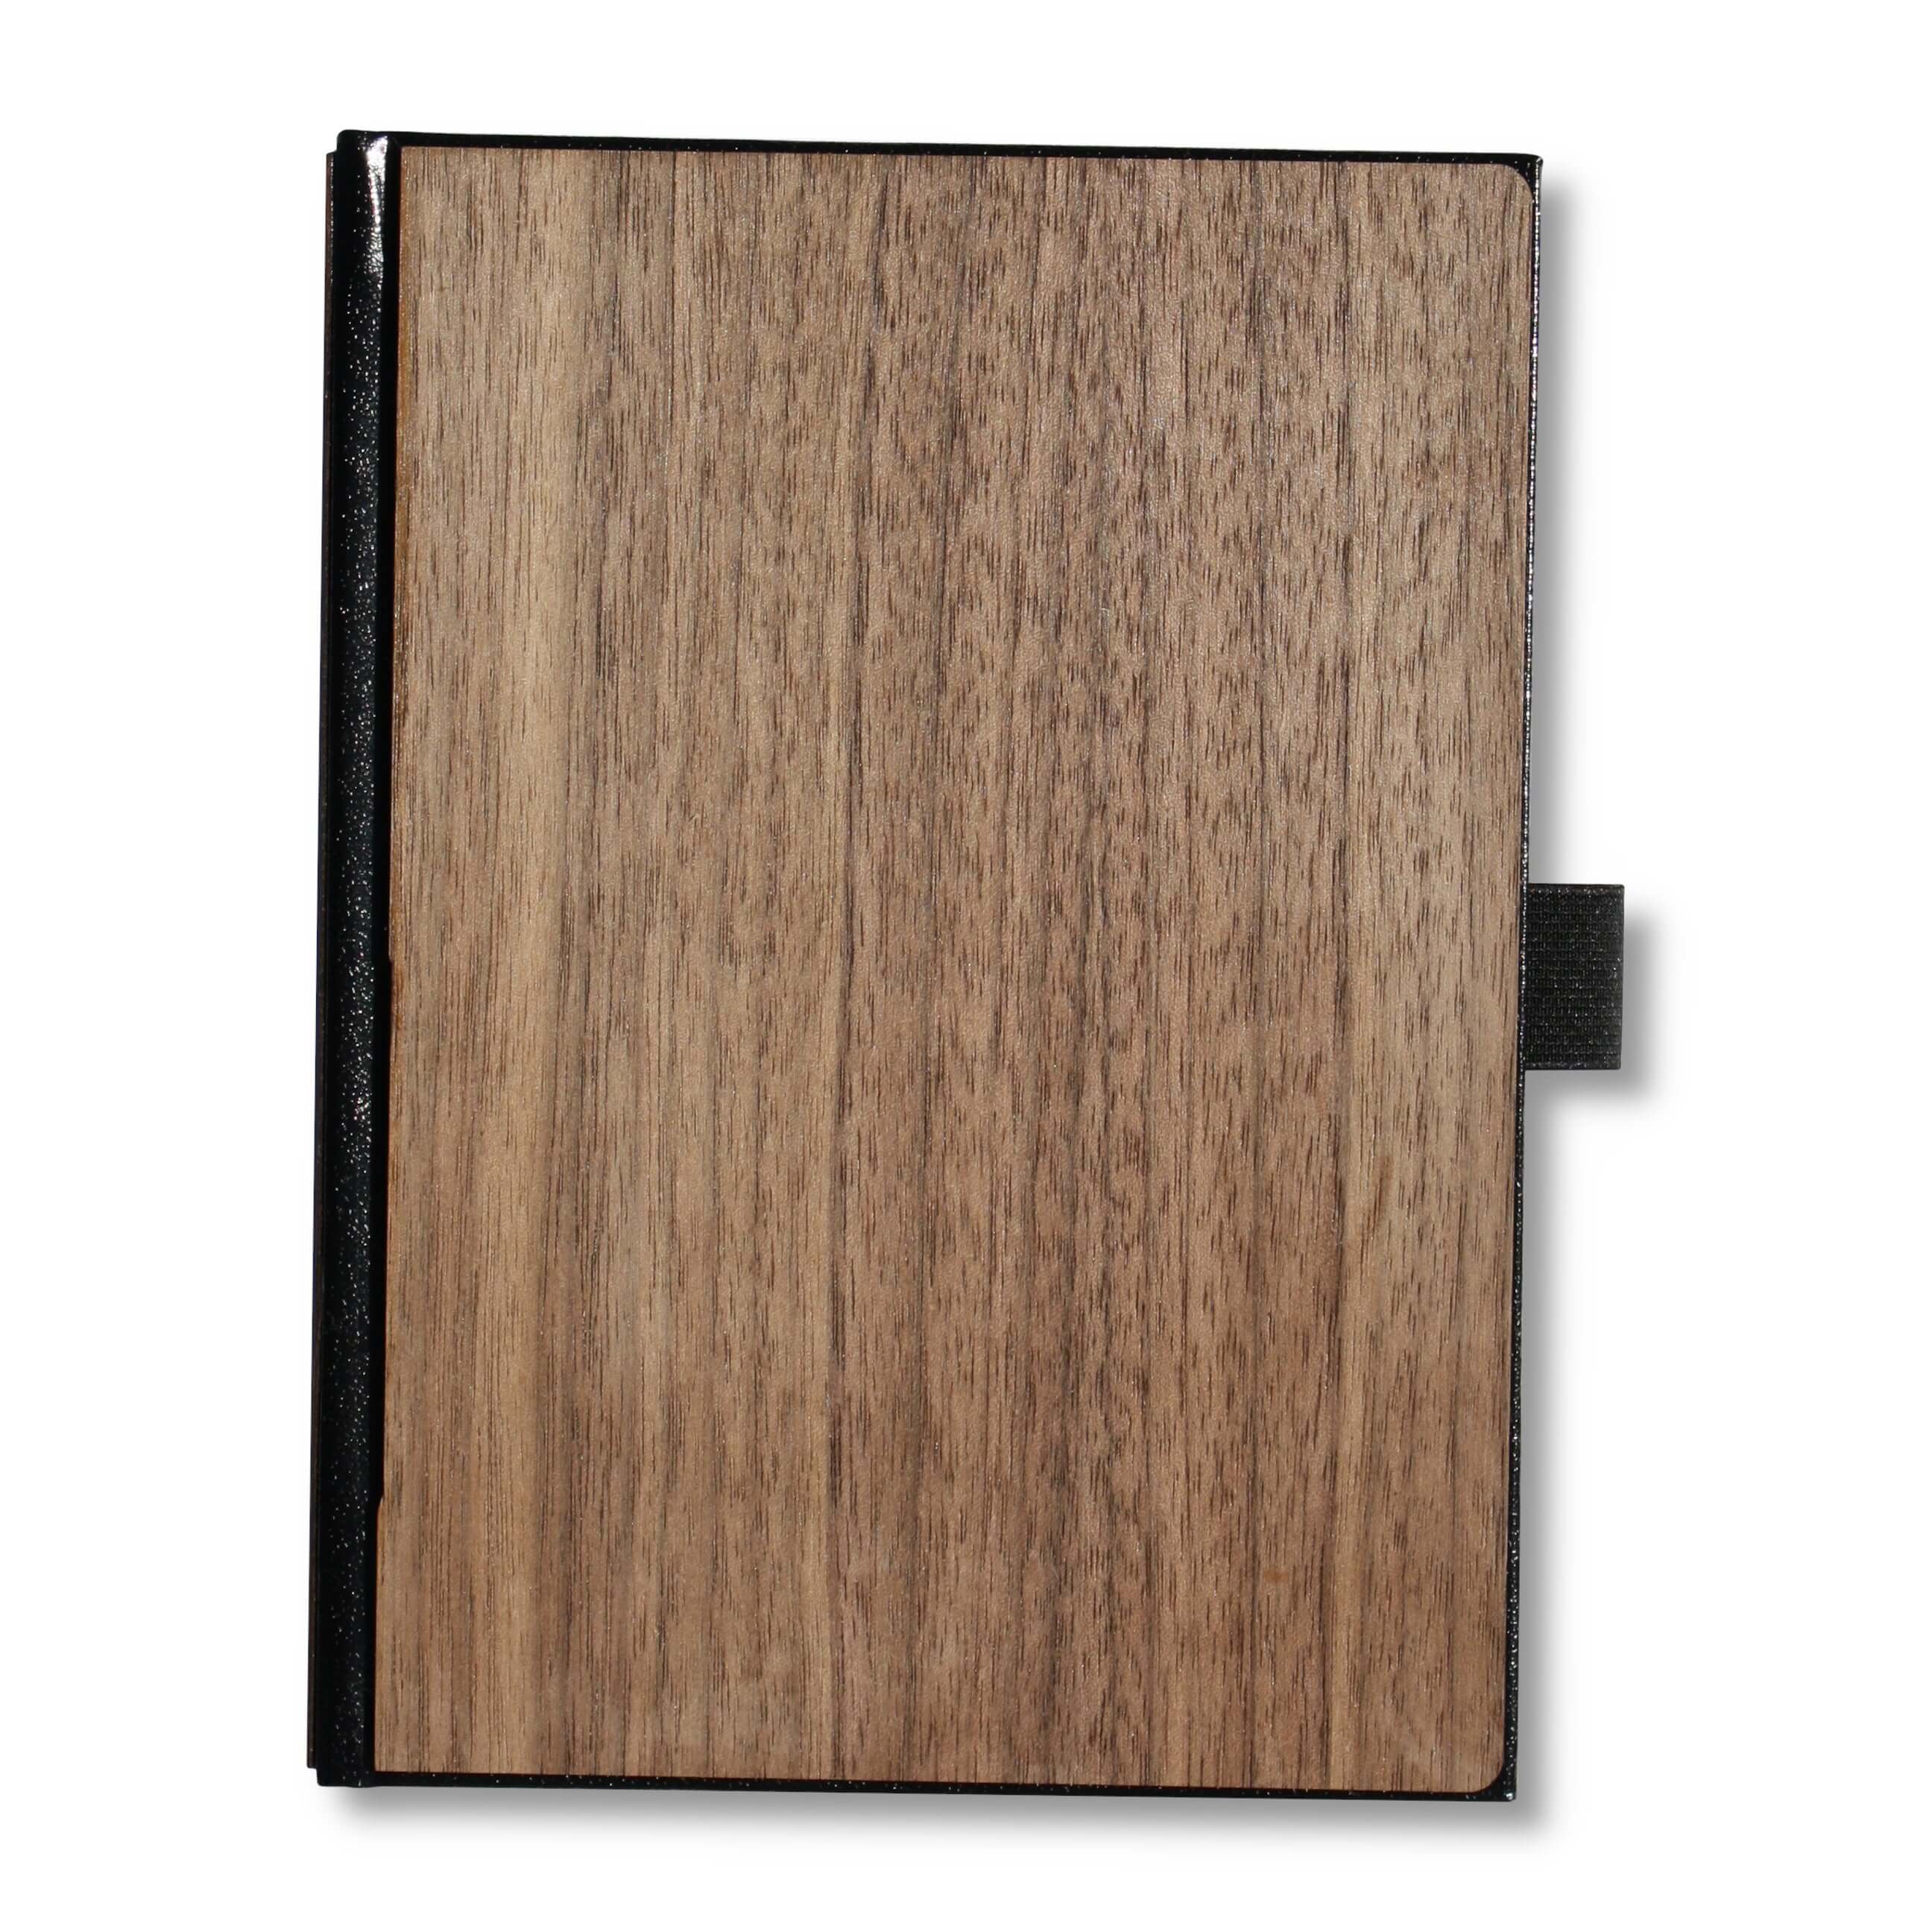 Customizable Wood Journal / Planner in Three Sizes